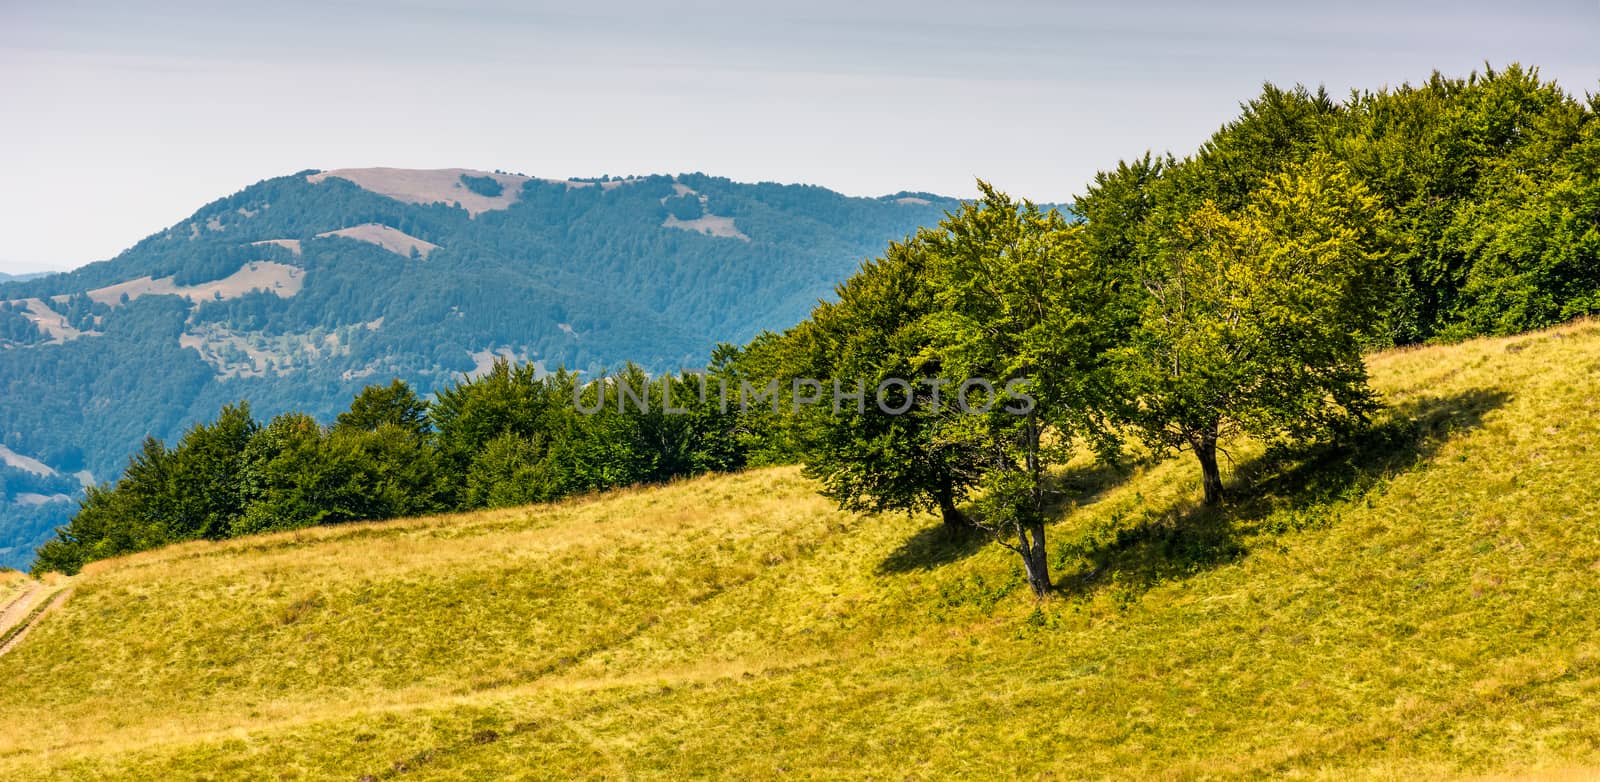 grassy hillside with trees on a bright day by Pellinni